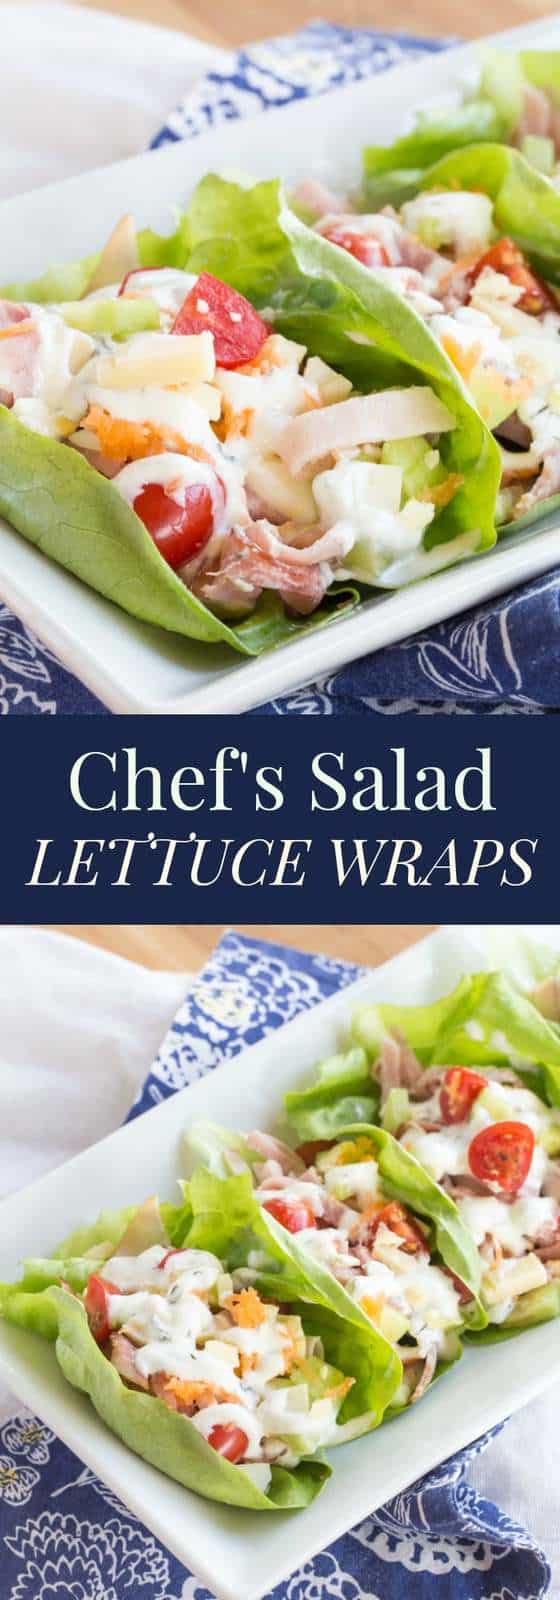 Chef's Salad Lettuce Wraps - turning your favorite salad recipe into finger food makes it even more fun and delicious with #HillshireFarmNaturals! #ad | cupcakesandkalechips.com | gluten free, grain free, low carb